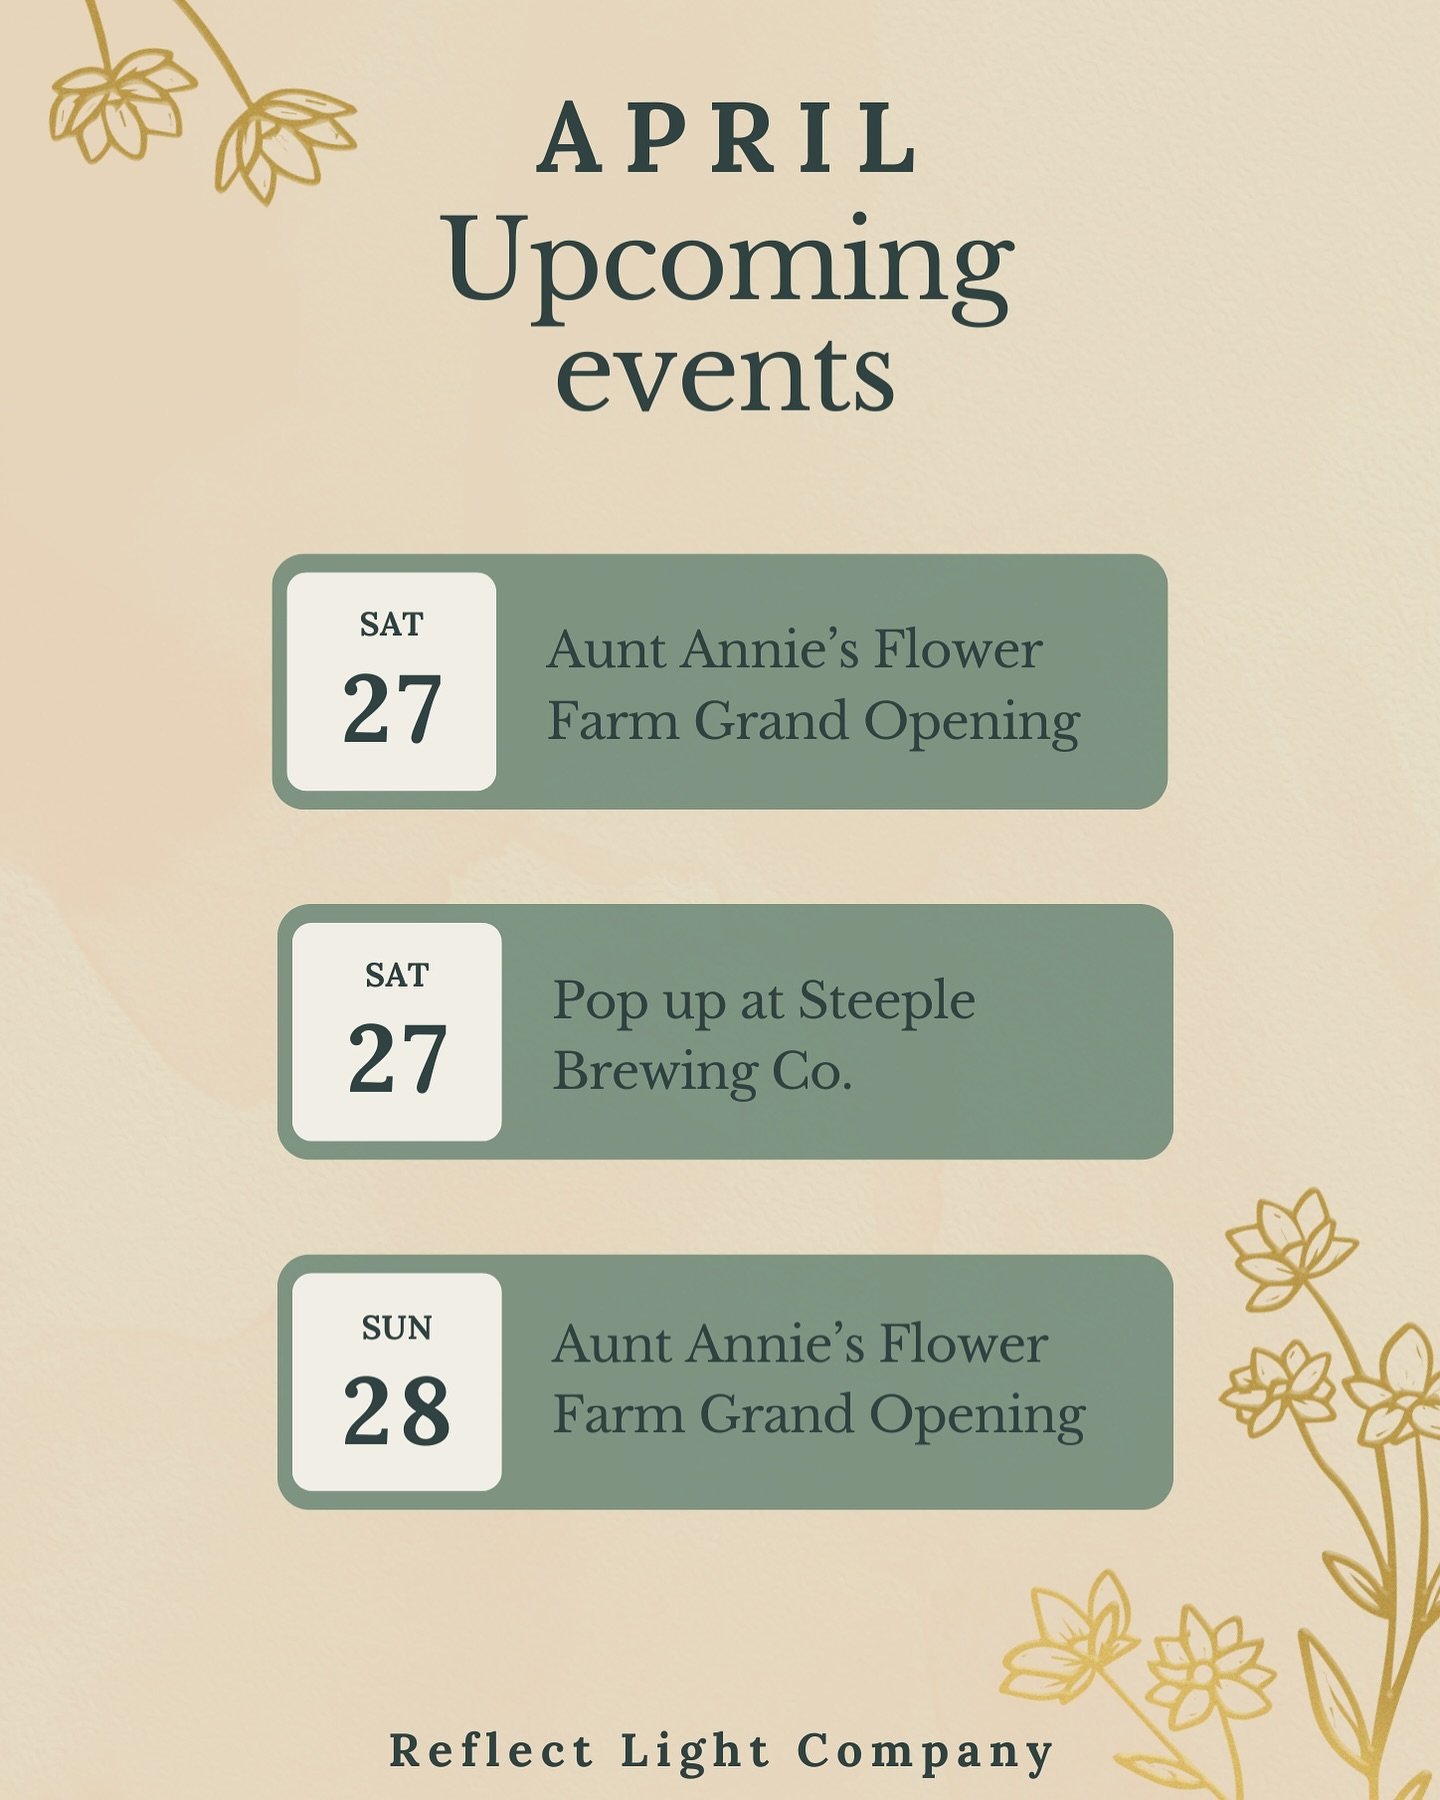 Heading into a super fun weekend 🙌🏻

Come out to @auntanniesflowerfarm for there grand opening event happening 9:00-2:00 Saturday and 1:00-4:00 Sunday!

We will be popping up at @steeplebrewing from 4:00-8:00 Saturday night! 

ALSO, in person purch